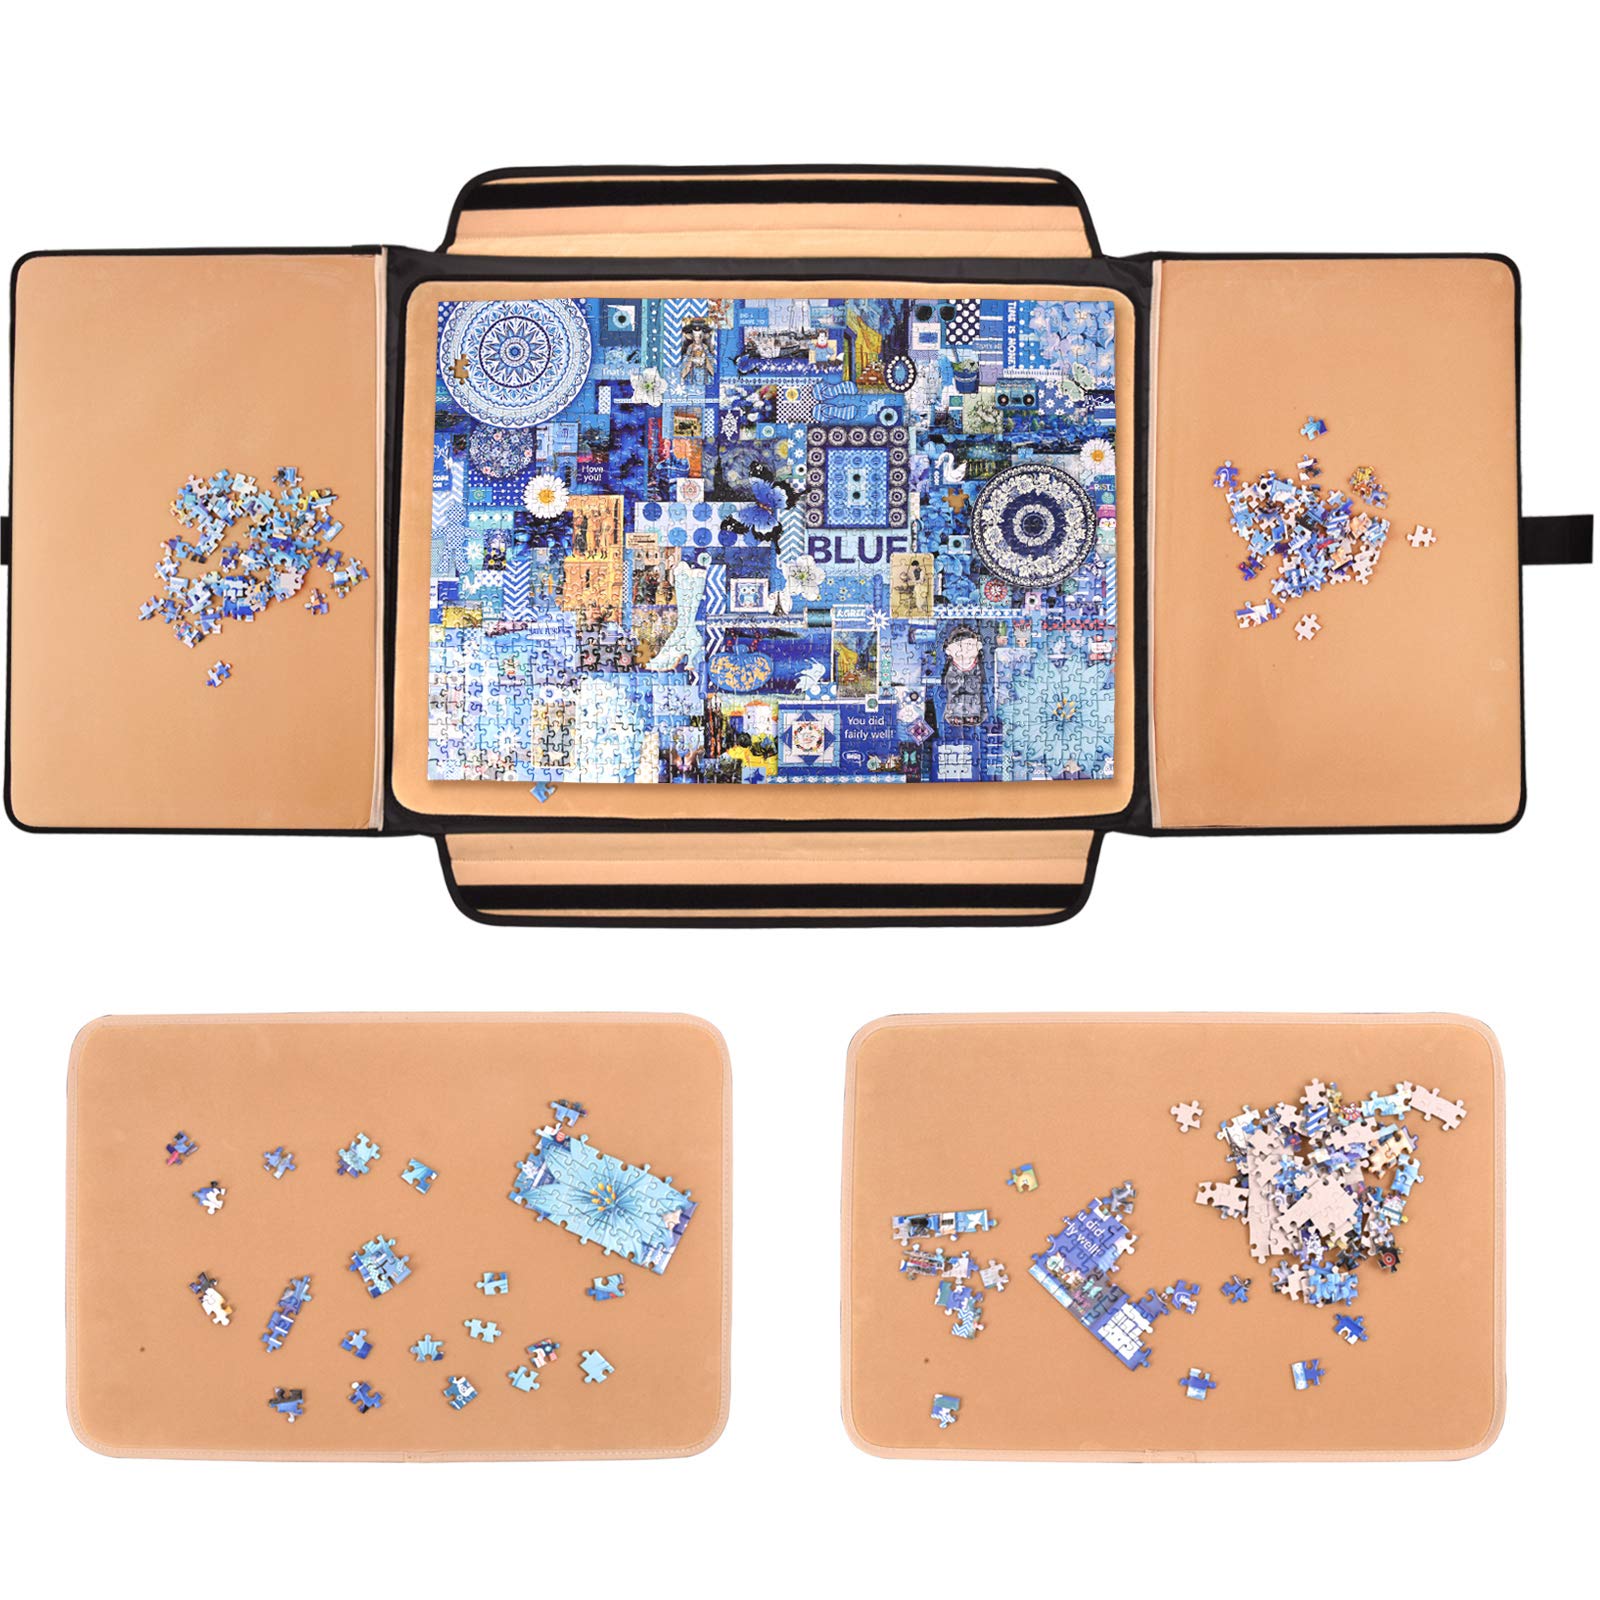 1000 Pieces Jigsaw Puzzle Board Portable, Stowaway Puzzles Board Caddy, Jigsaw Puzzle Case, Puzzle Accessories Puzzle Storage Case Saver, Non-Slip Surface